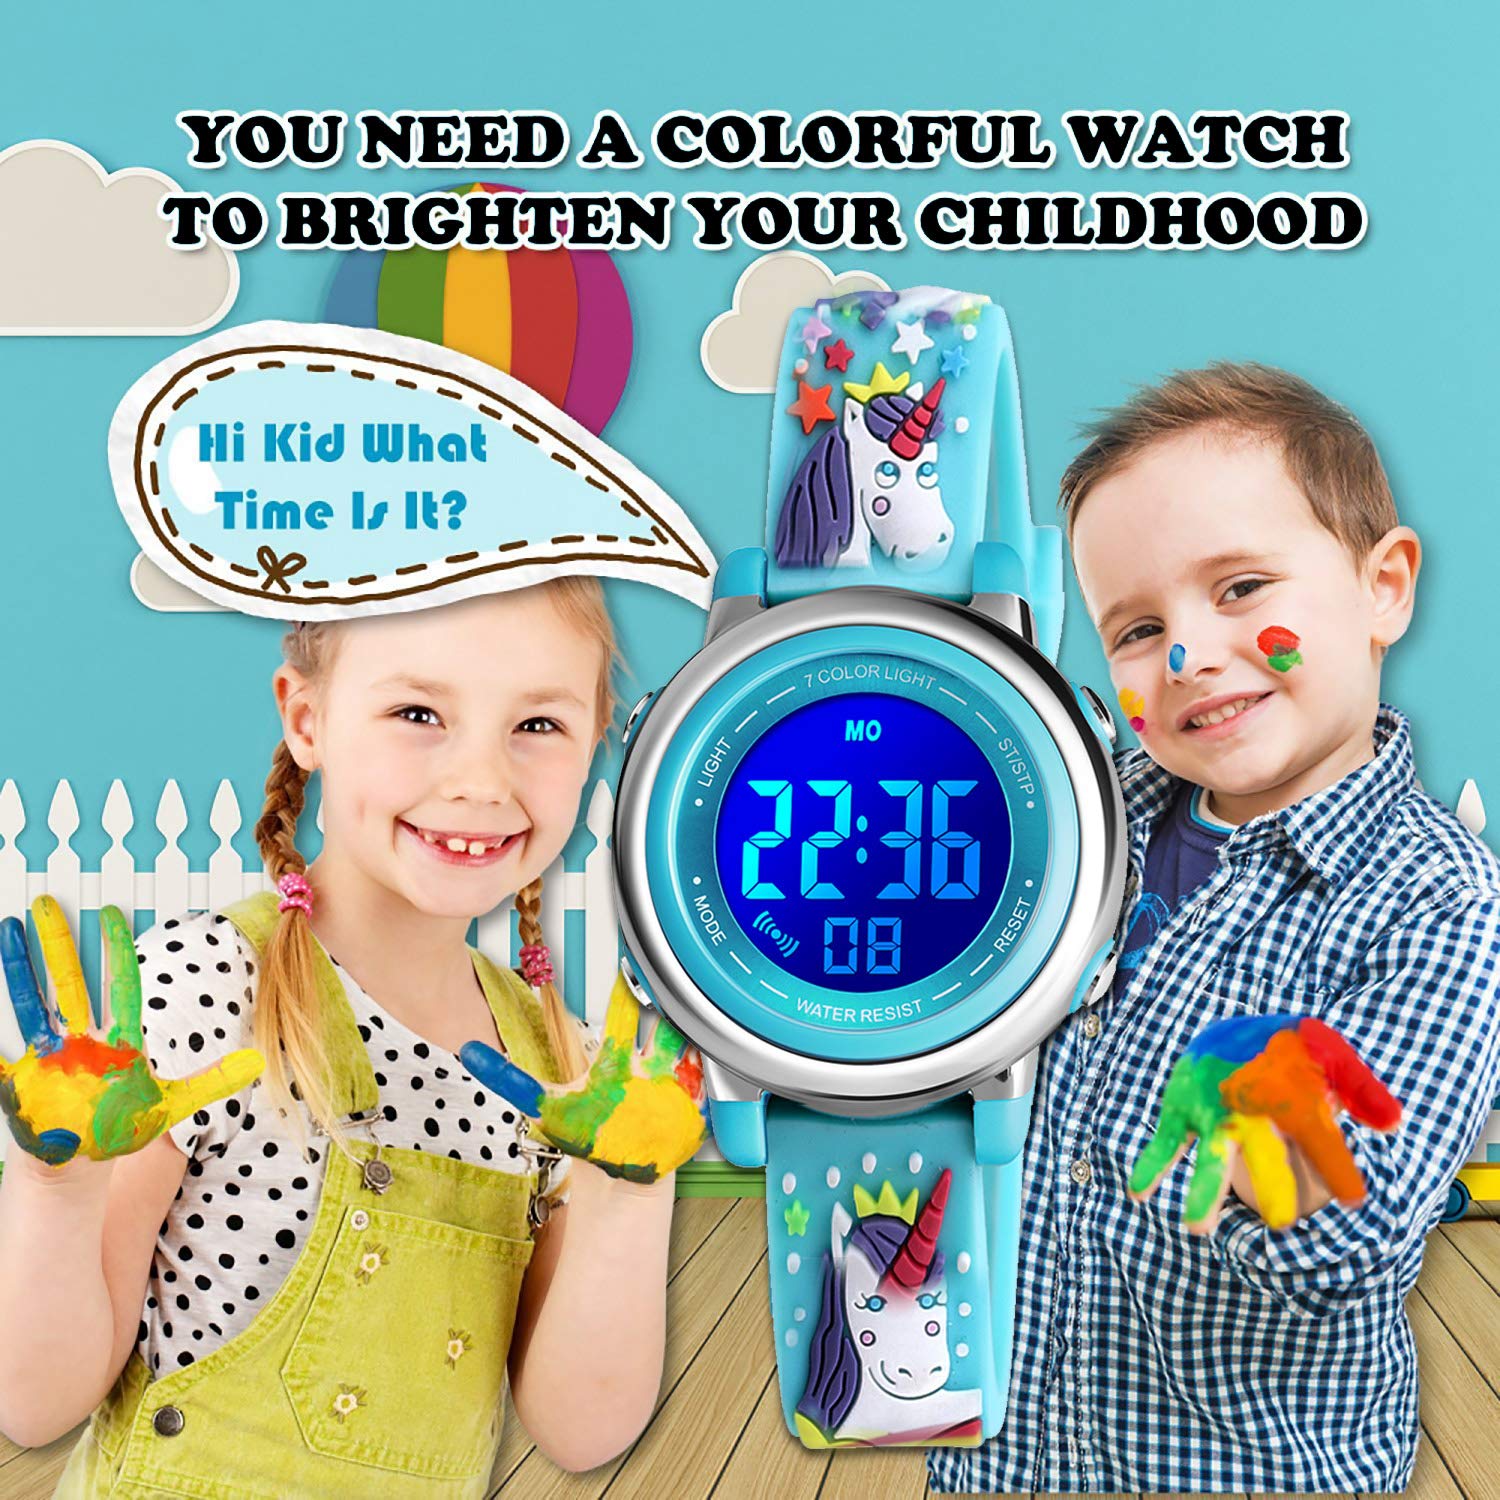 cofuo Kids Digital Sport Waterproof Watch for Girls Boys, Kid Sports Outdoor LED Electrical Watches with Luminous Alarm Stopwatch Child Wristwatch